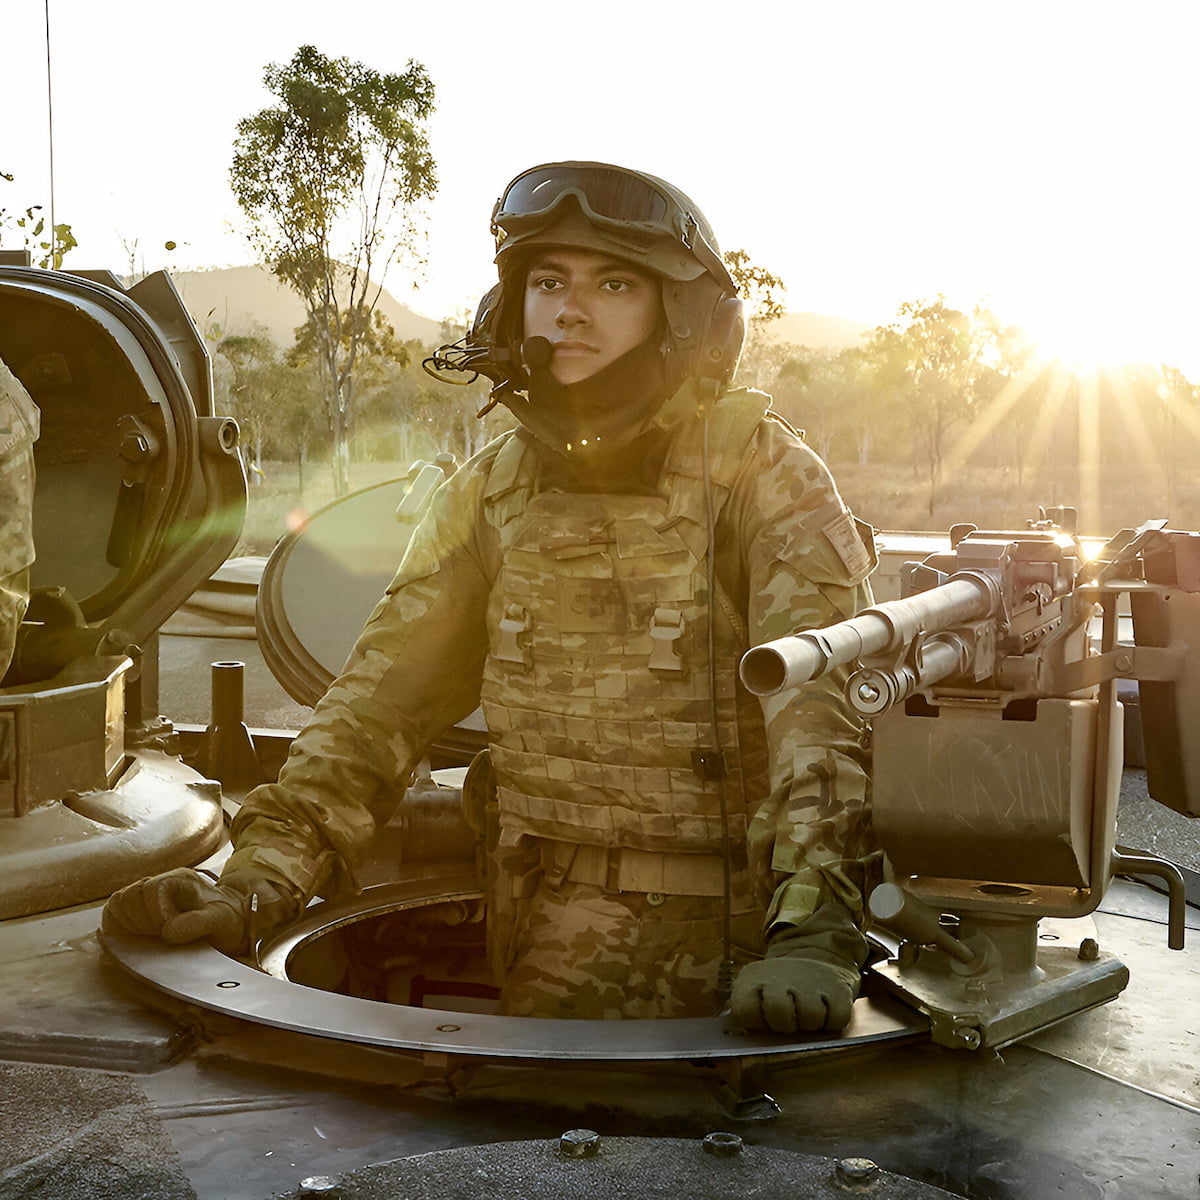 An Army member is standing inside a tank, preparing for combat.